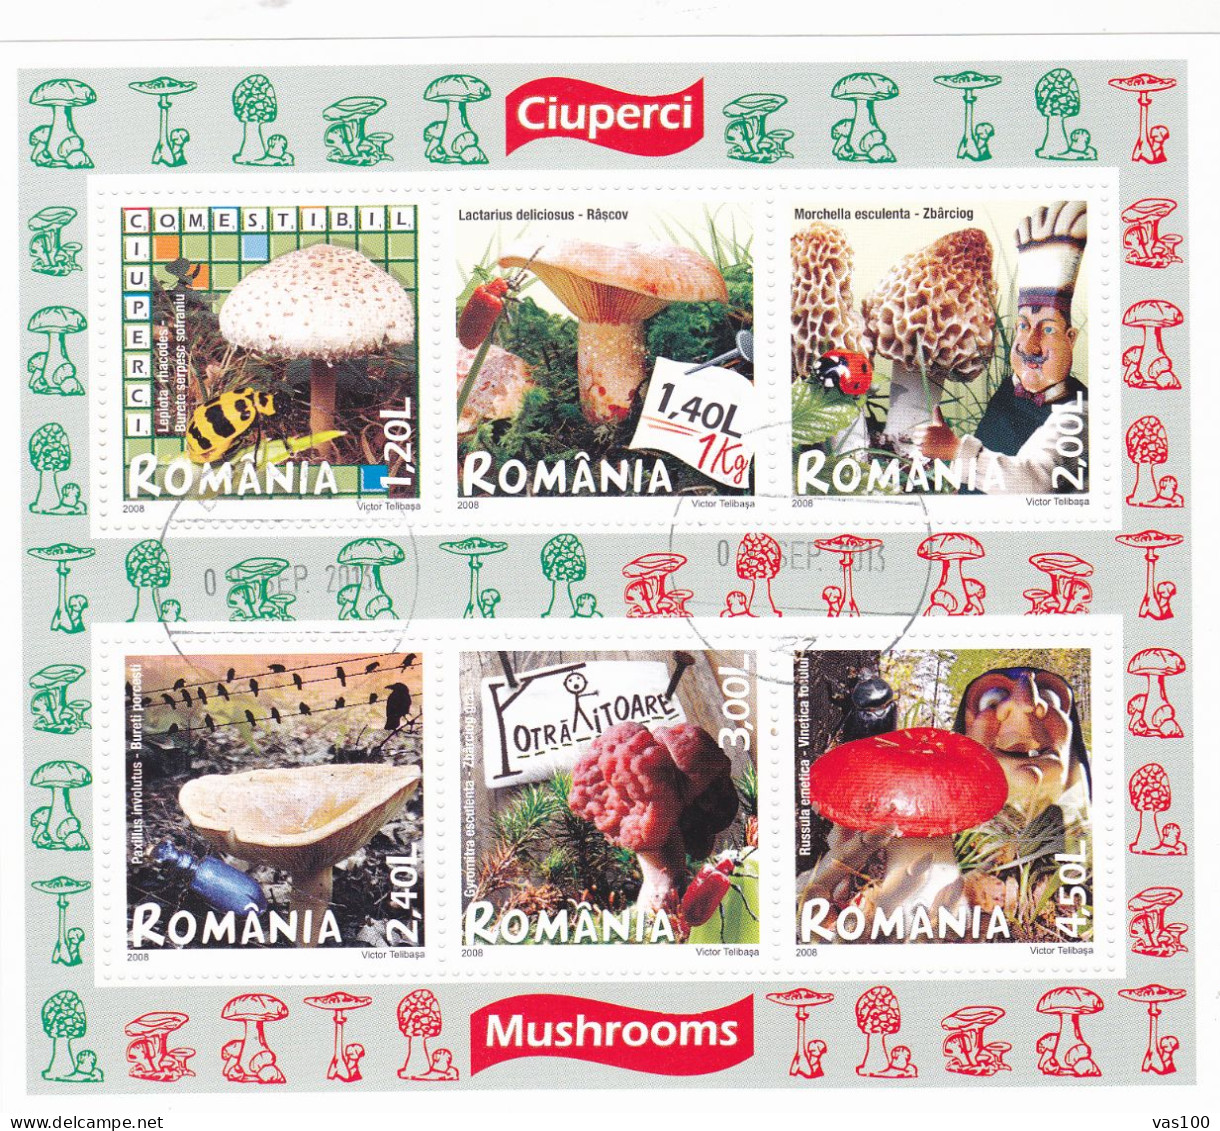 Romania Block417 (complete Issue)  2008 Mushrooms  Souvenir Sheet Used - Used Stamps